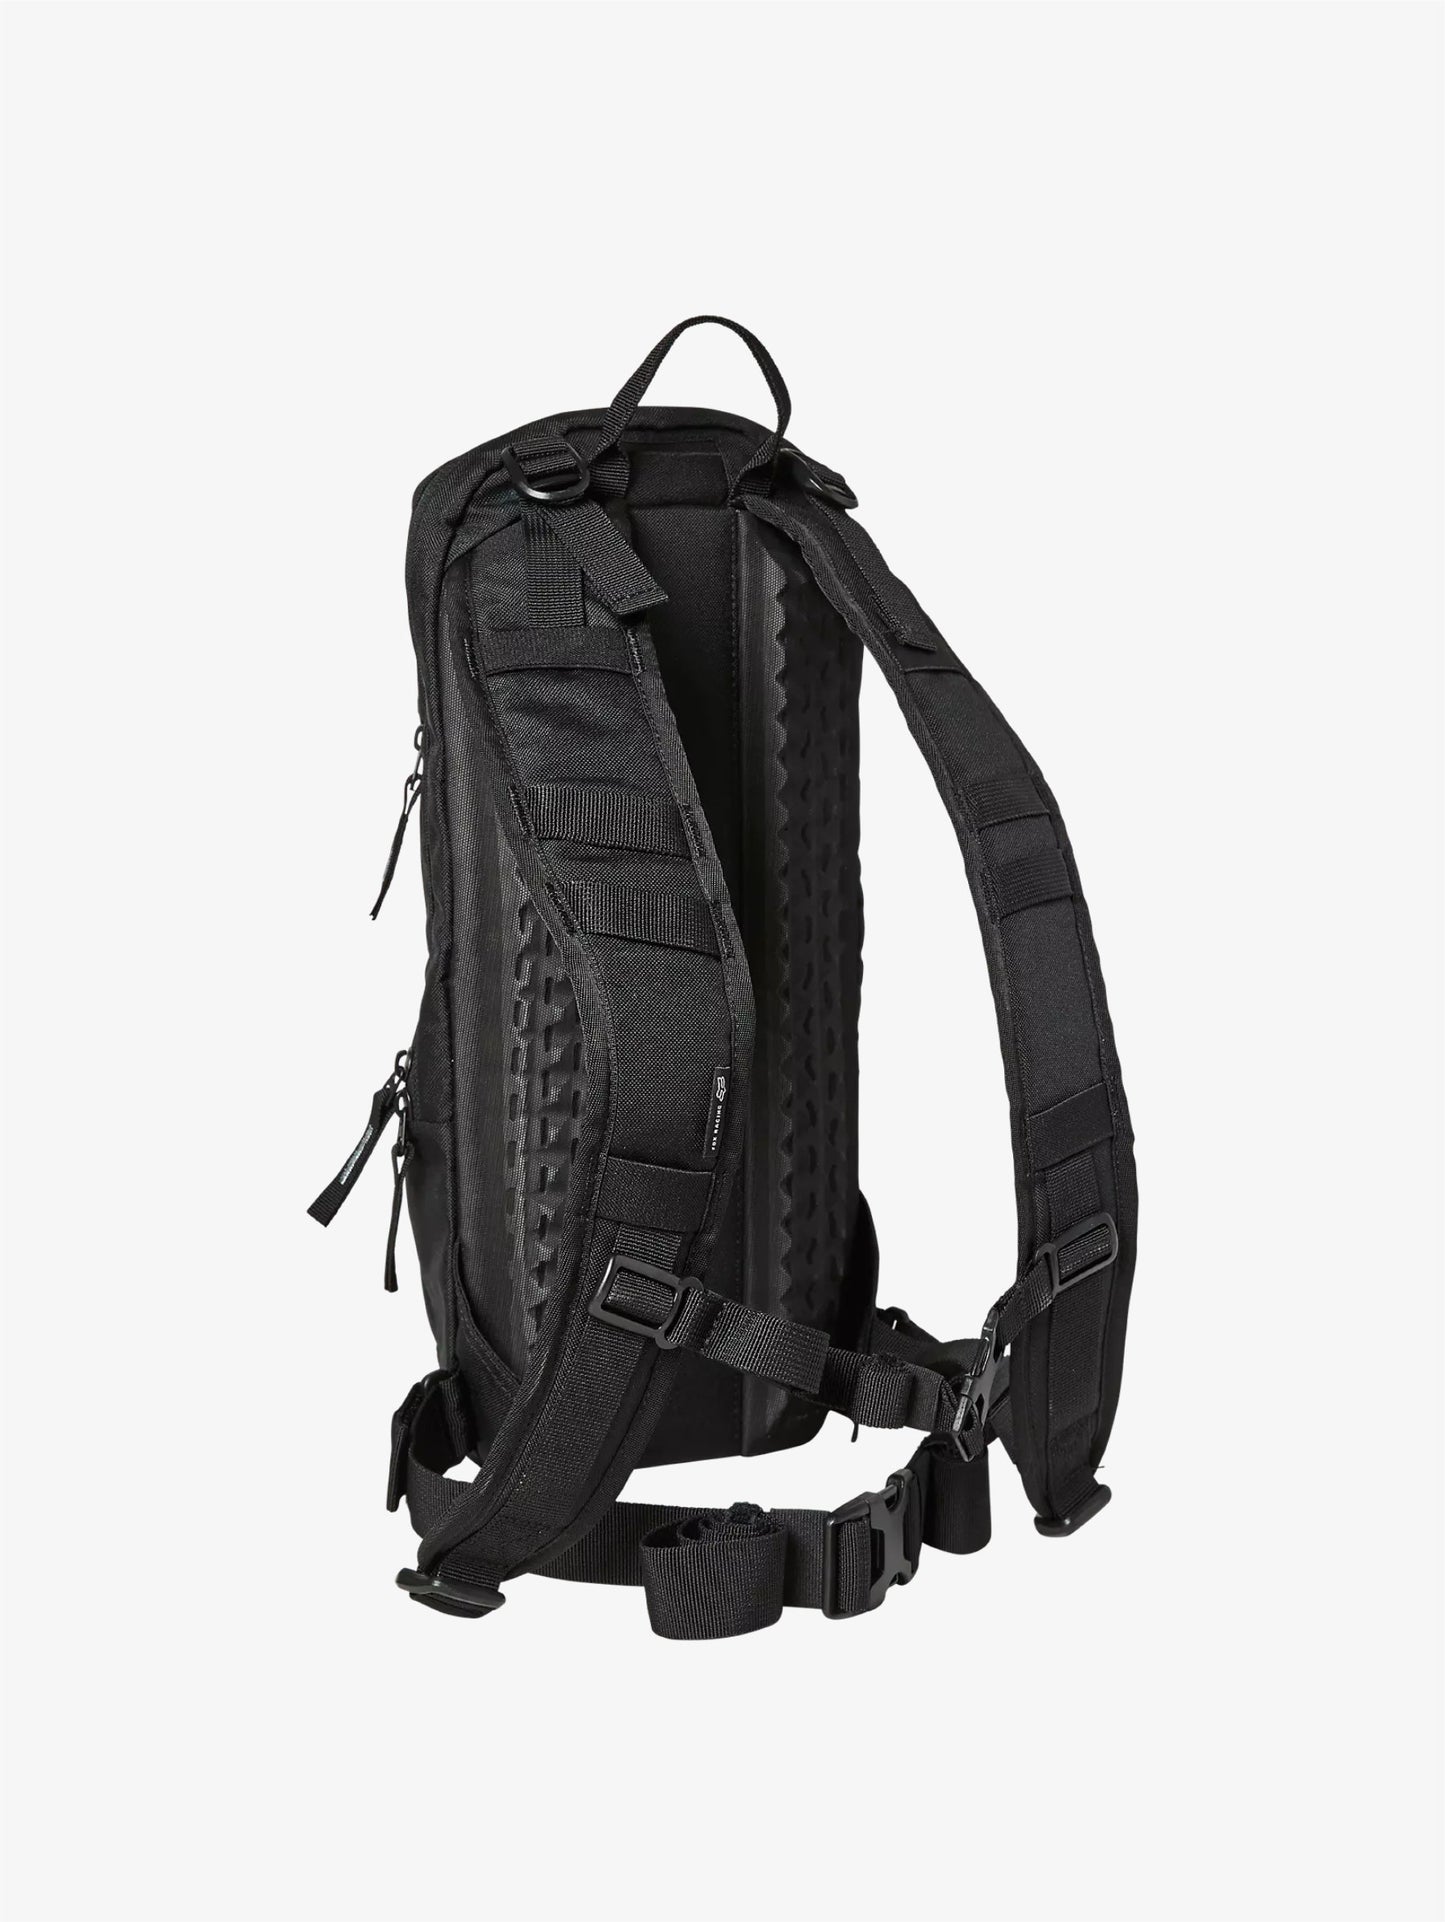 Utility 6L Hydration Pack backpack black